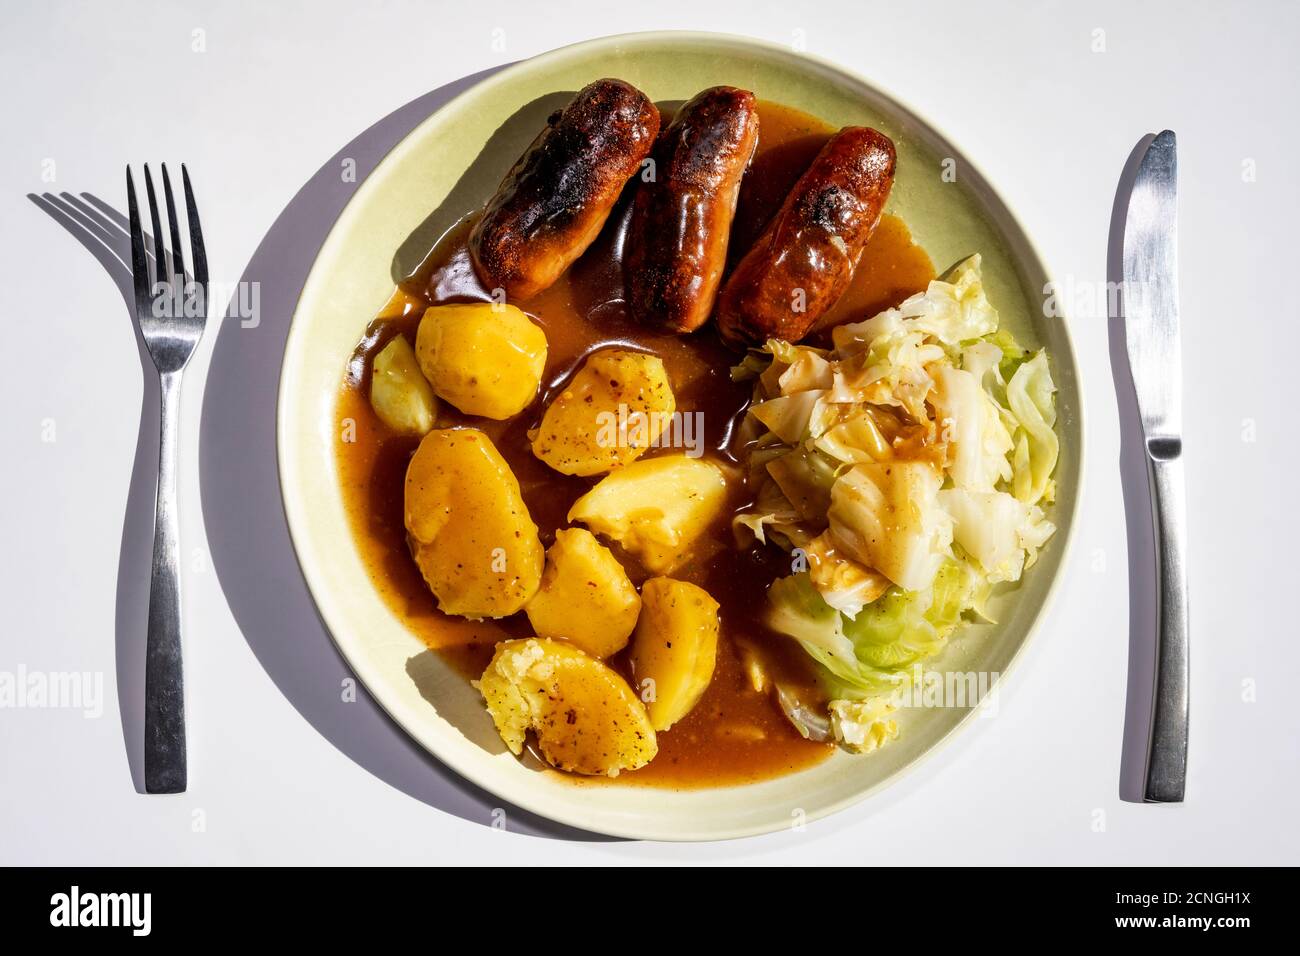 Sausages boiled potatoes and cabbage with gravy Stock Photo